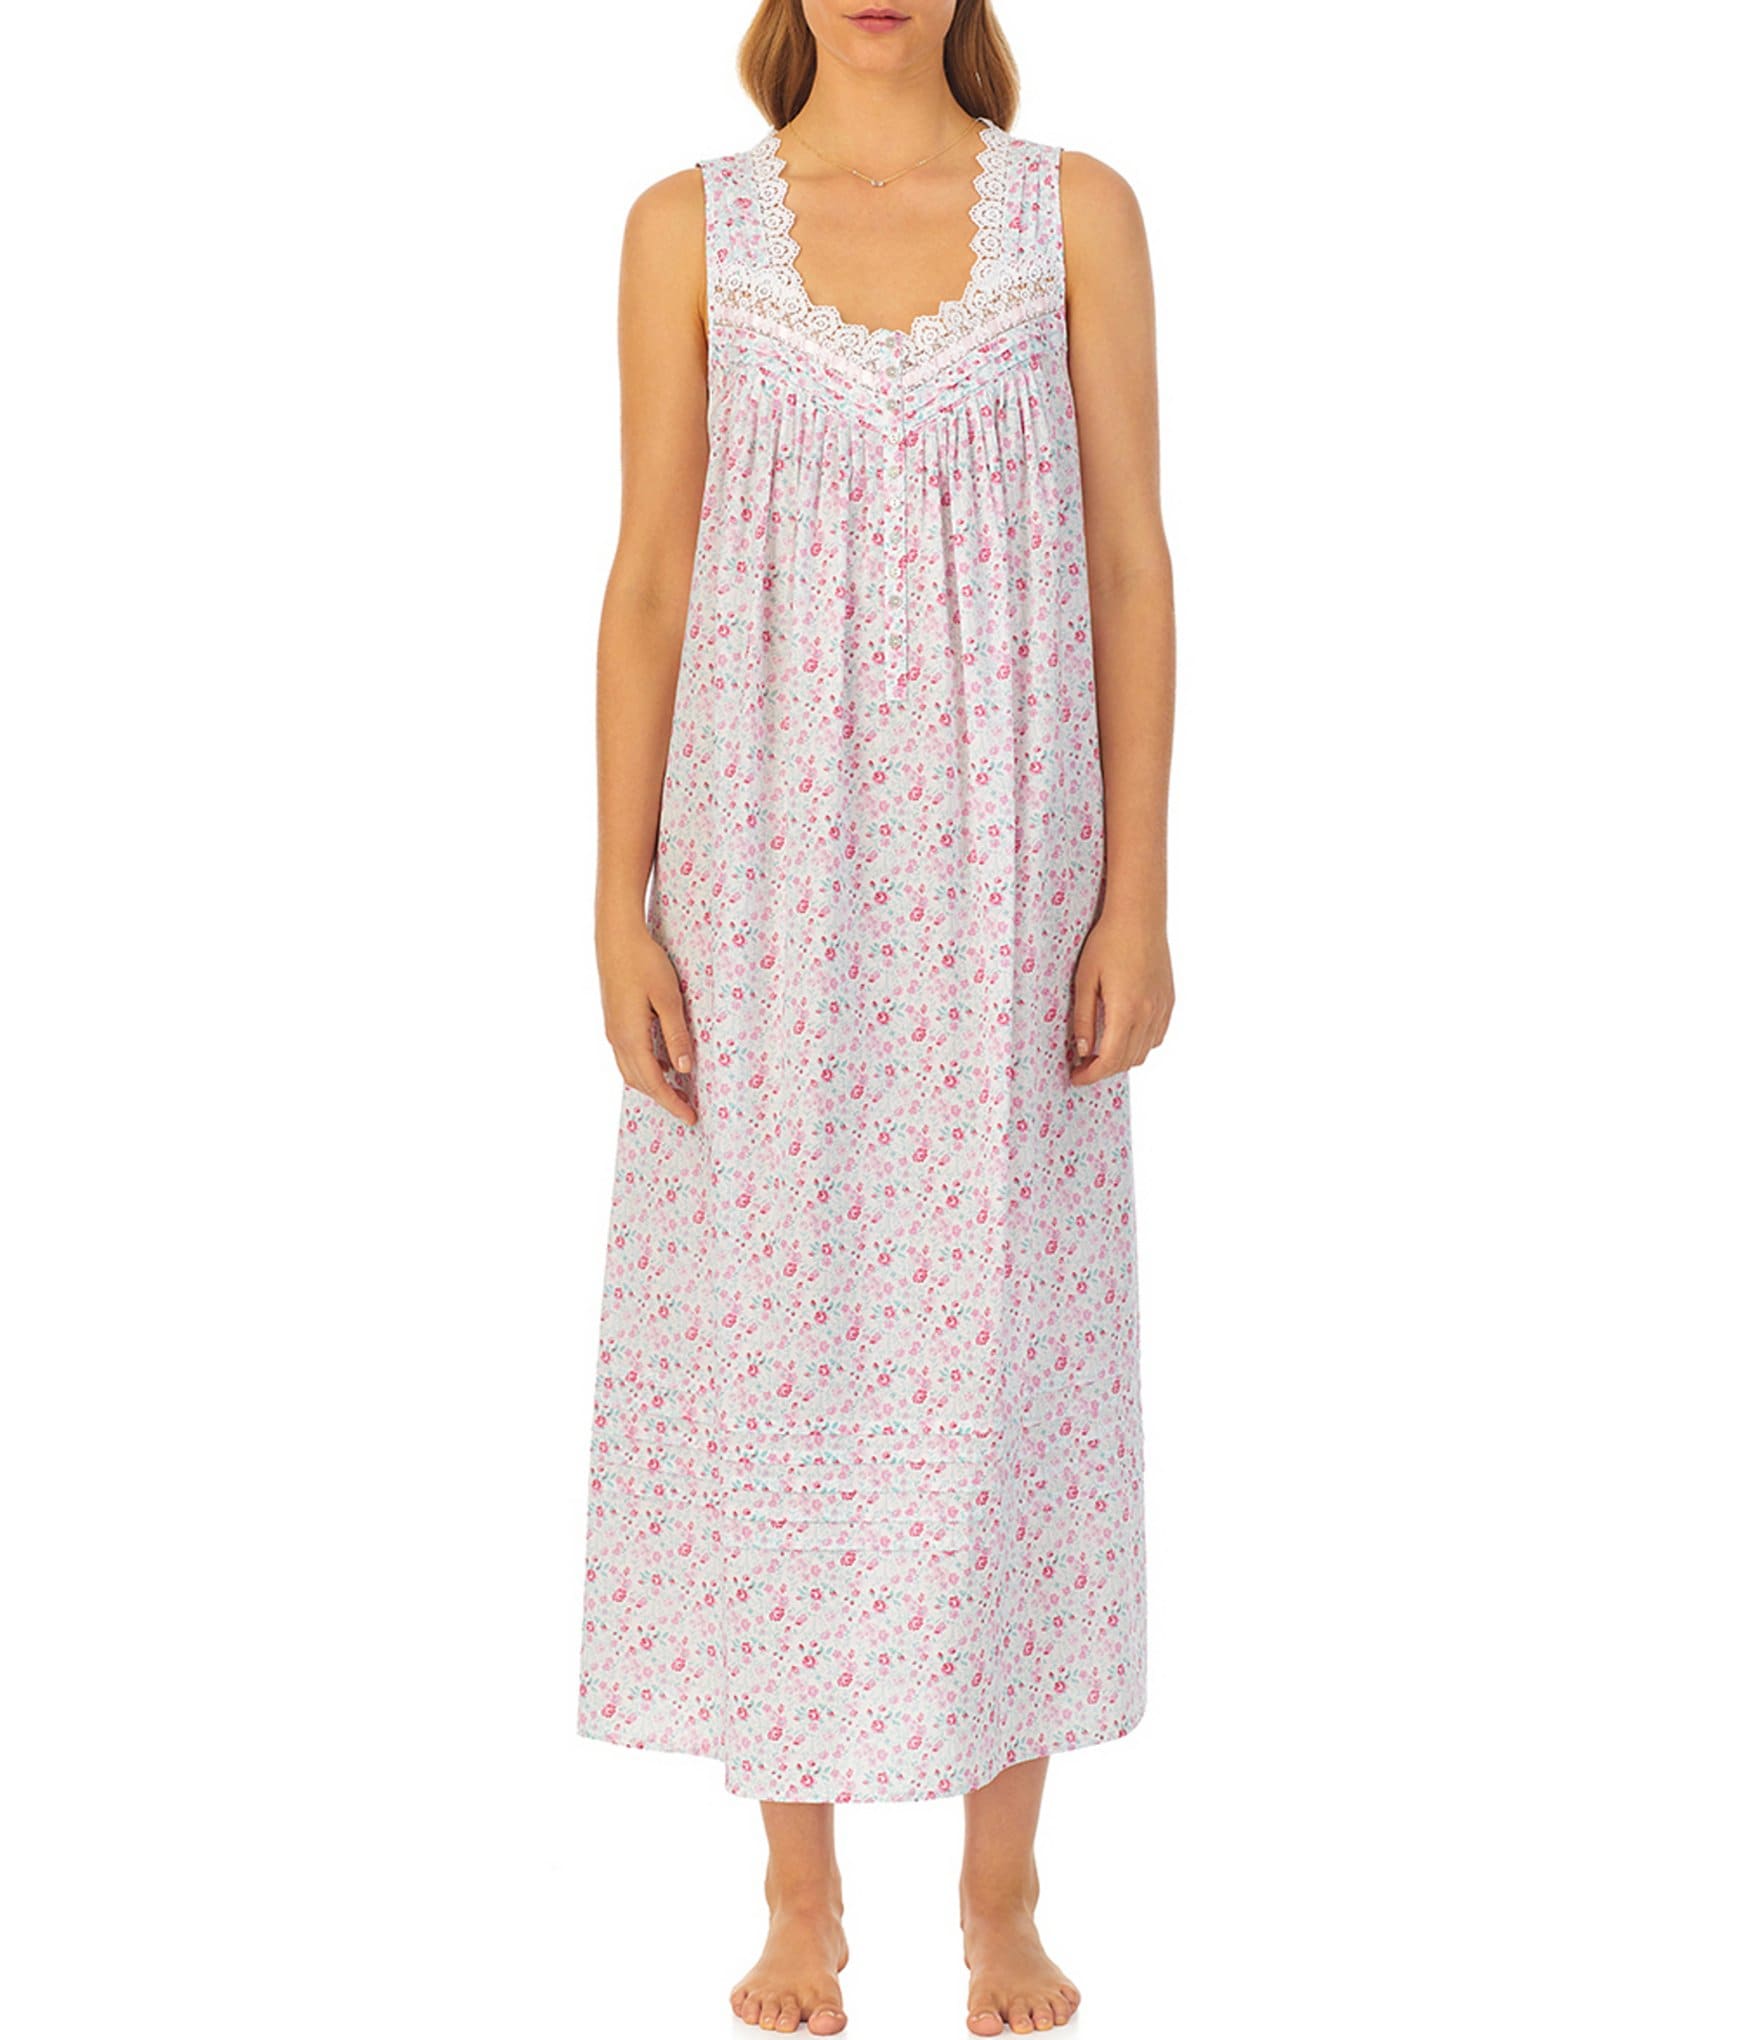 cotton nightgowns: Women's Nightgowns & Nightshirts